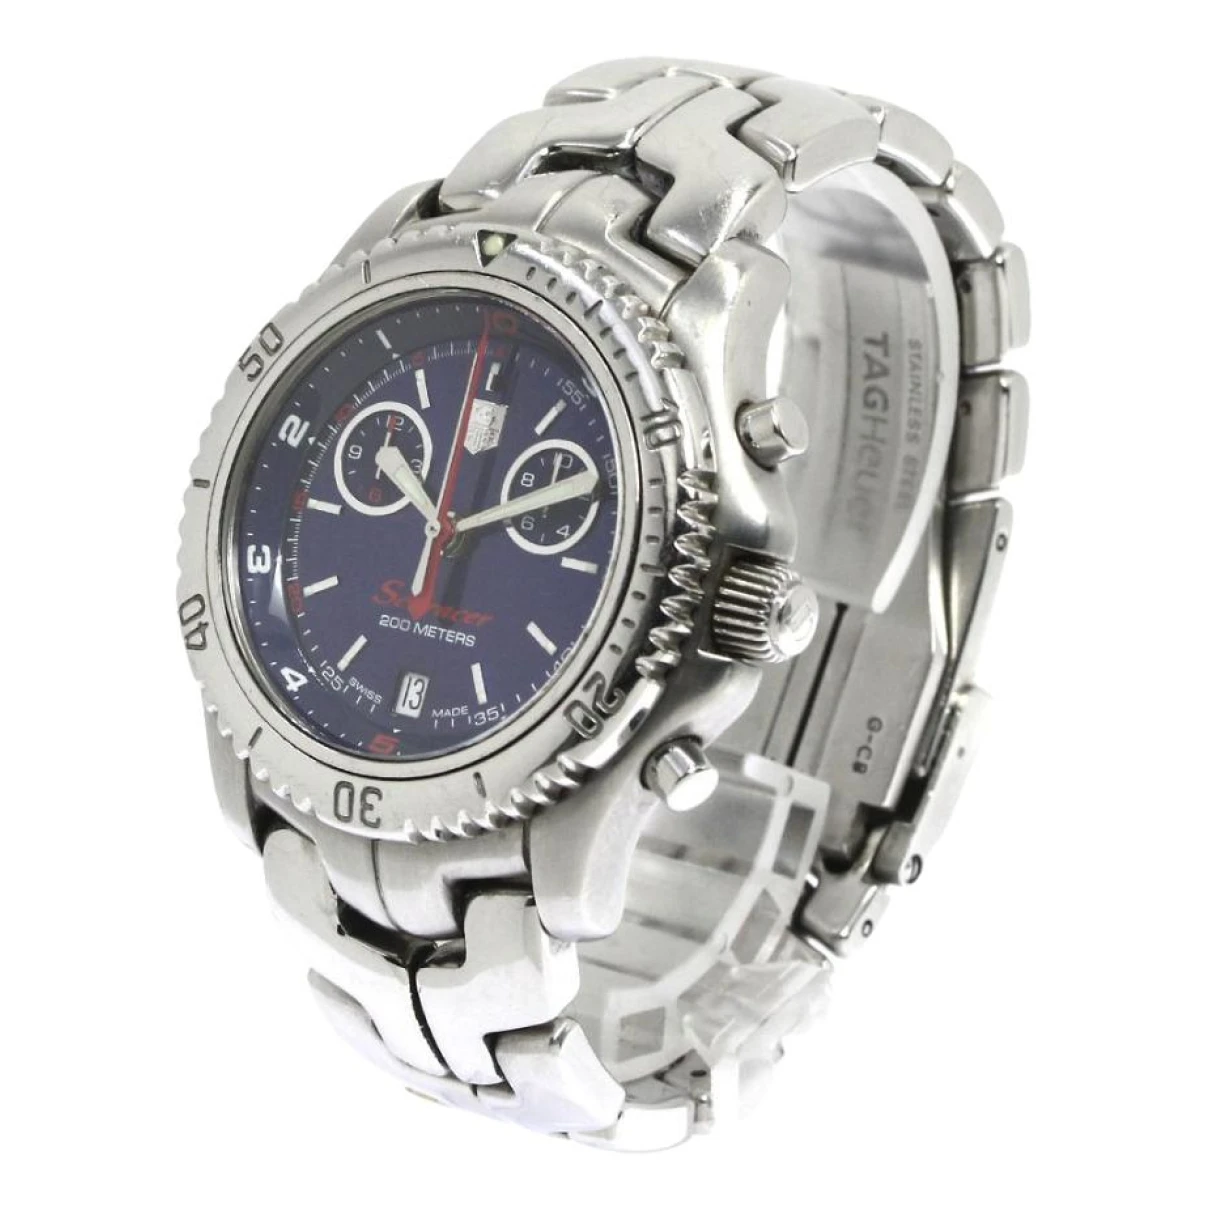 Pre-owned Tag Heuer Link Watch In Silver